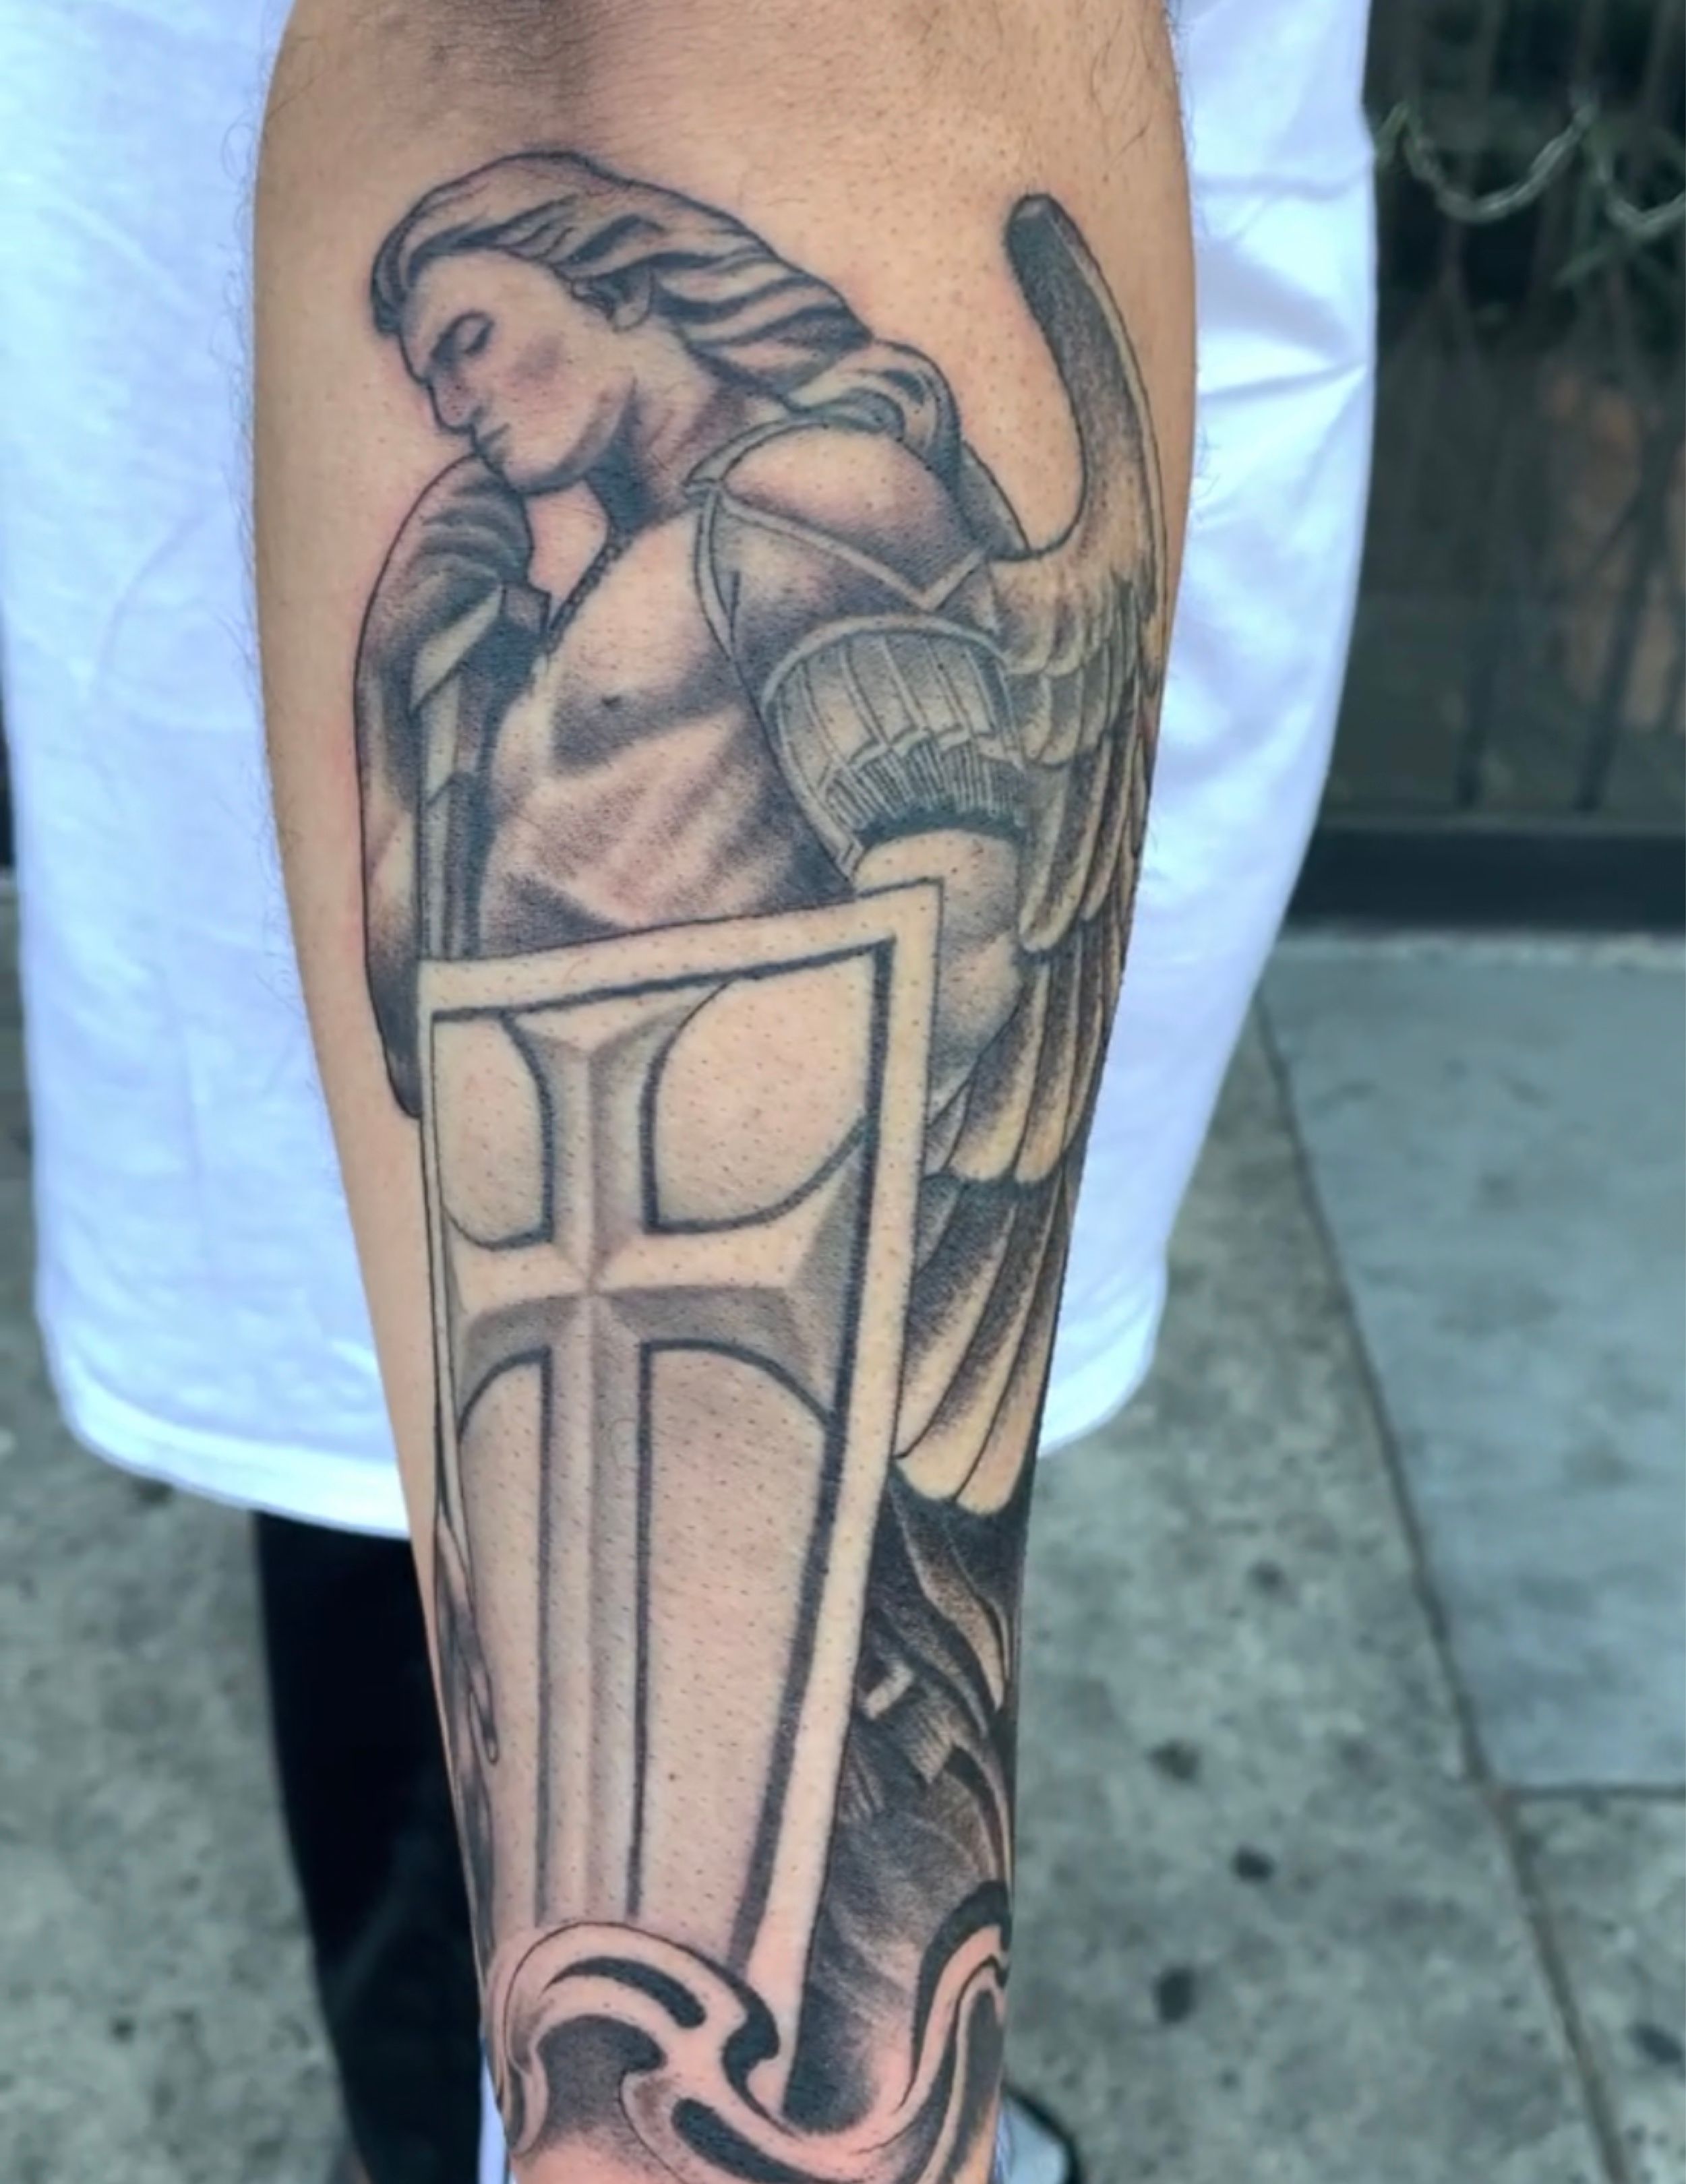 Ossian Staraj Tattoo - Saint Michael the Archangel. Healed & No filter.  Picture's from my customer, who's currently far, far away 🌍 Thank you Paul  👊🏻👊🏻 And thanks for your trust and